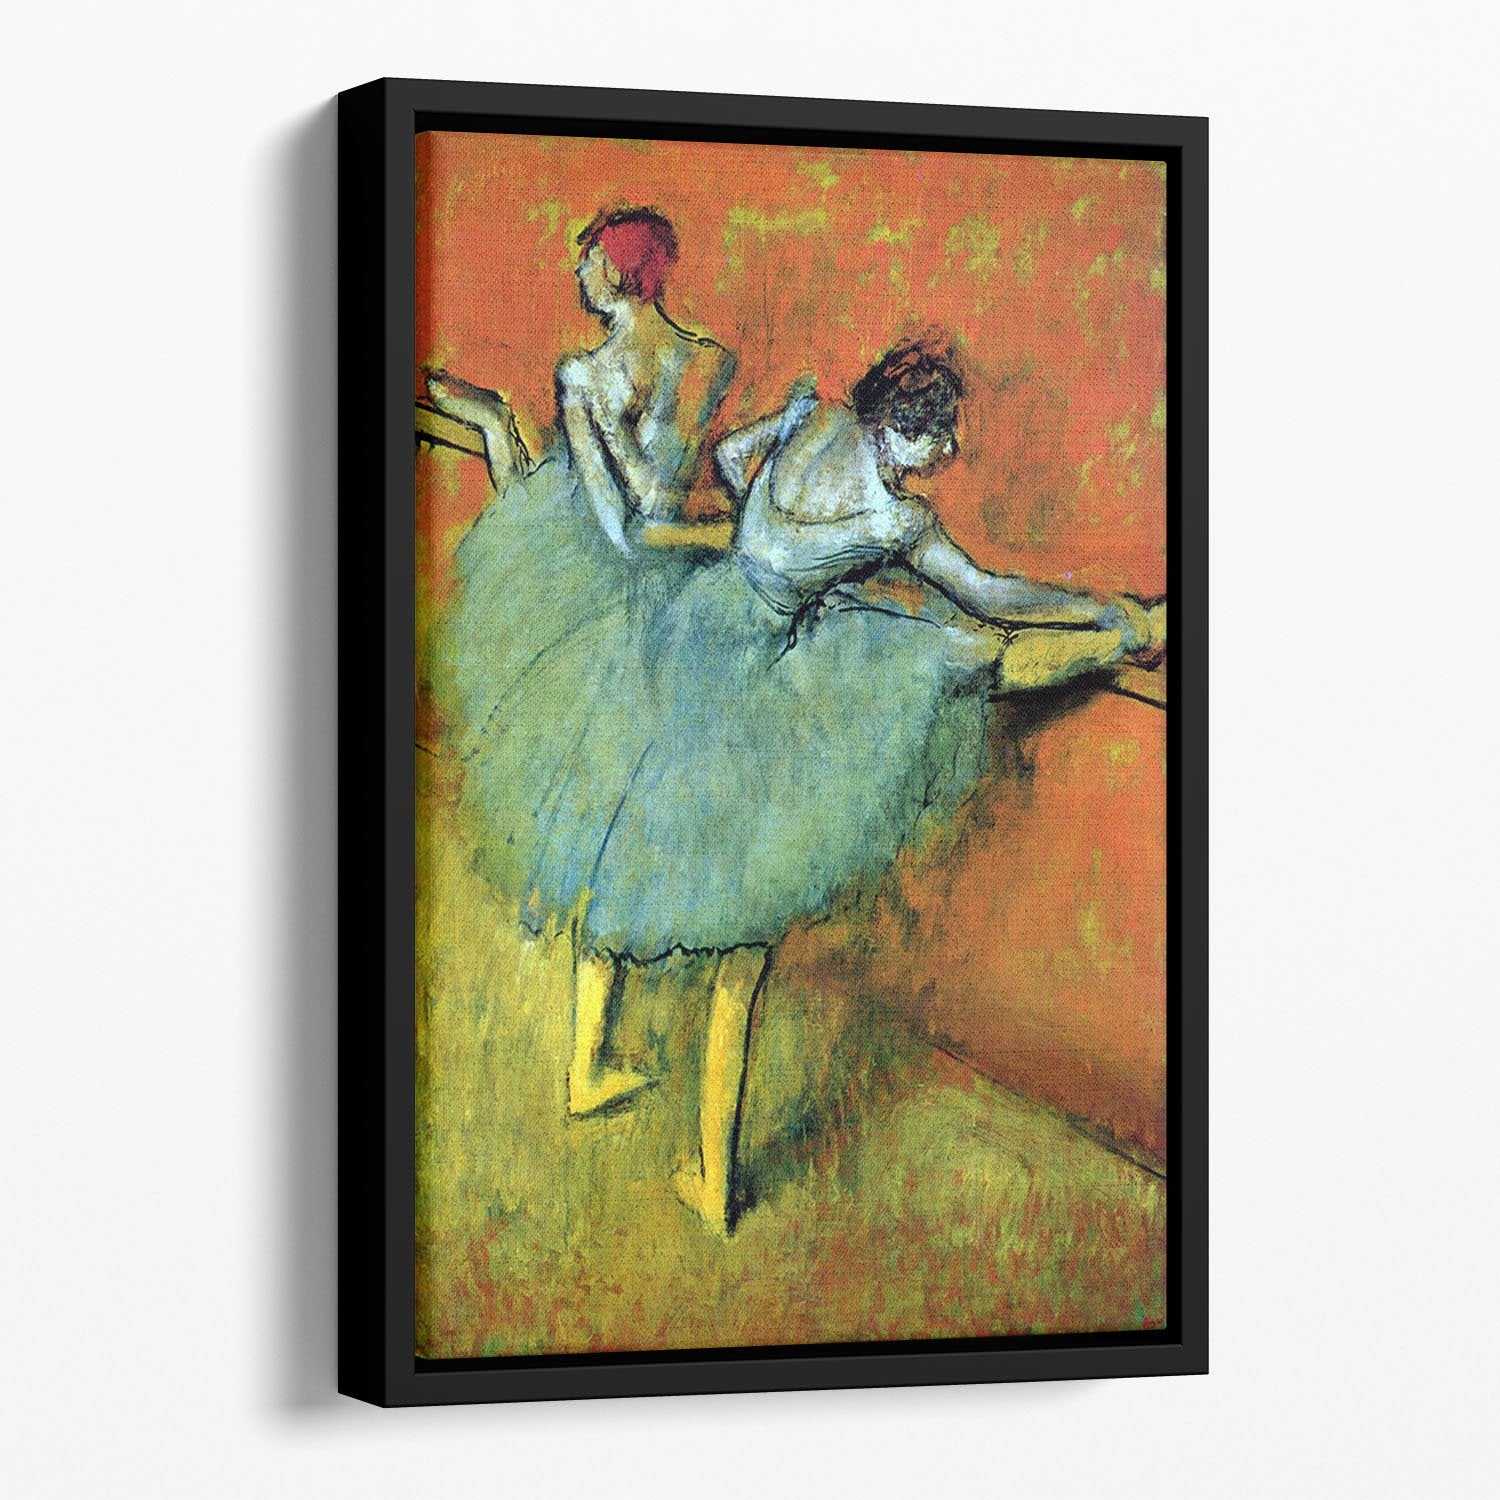 Dancers at the bar 1 by Degas Floating Framed Canvas